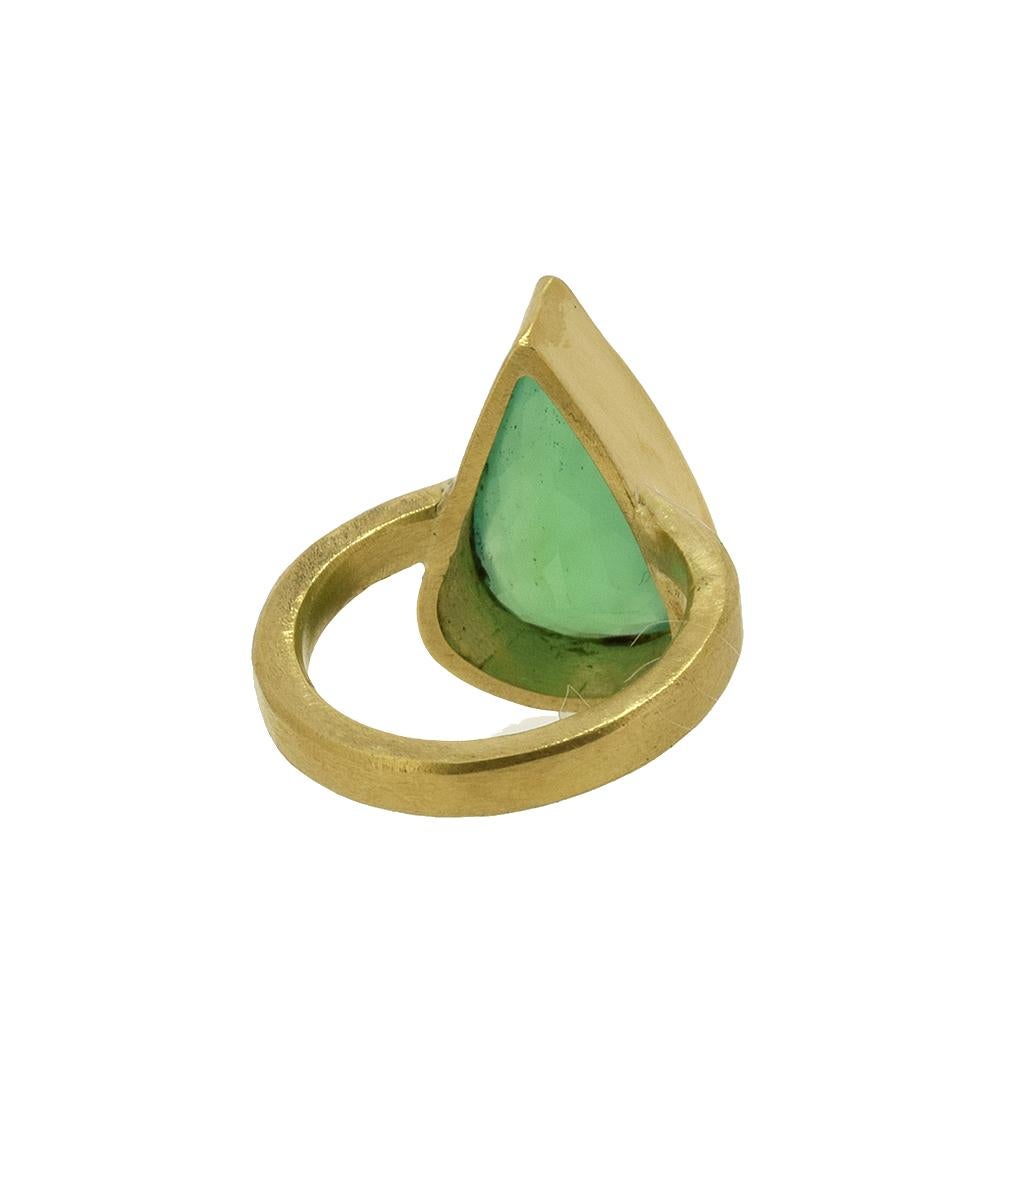 This 5.88 carat pear shape translucent chrysoprase is from Australia.  This ring is a one-of-a-kind & hand fabricated using 18K recycled gold.  Size 6. Although it's a 'cocktail' ring, it is also great for everyday & comfortable to wear.